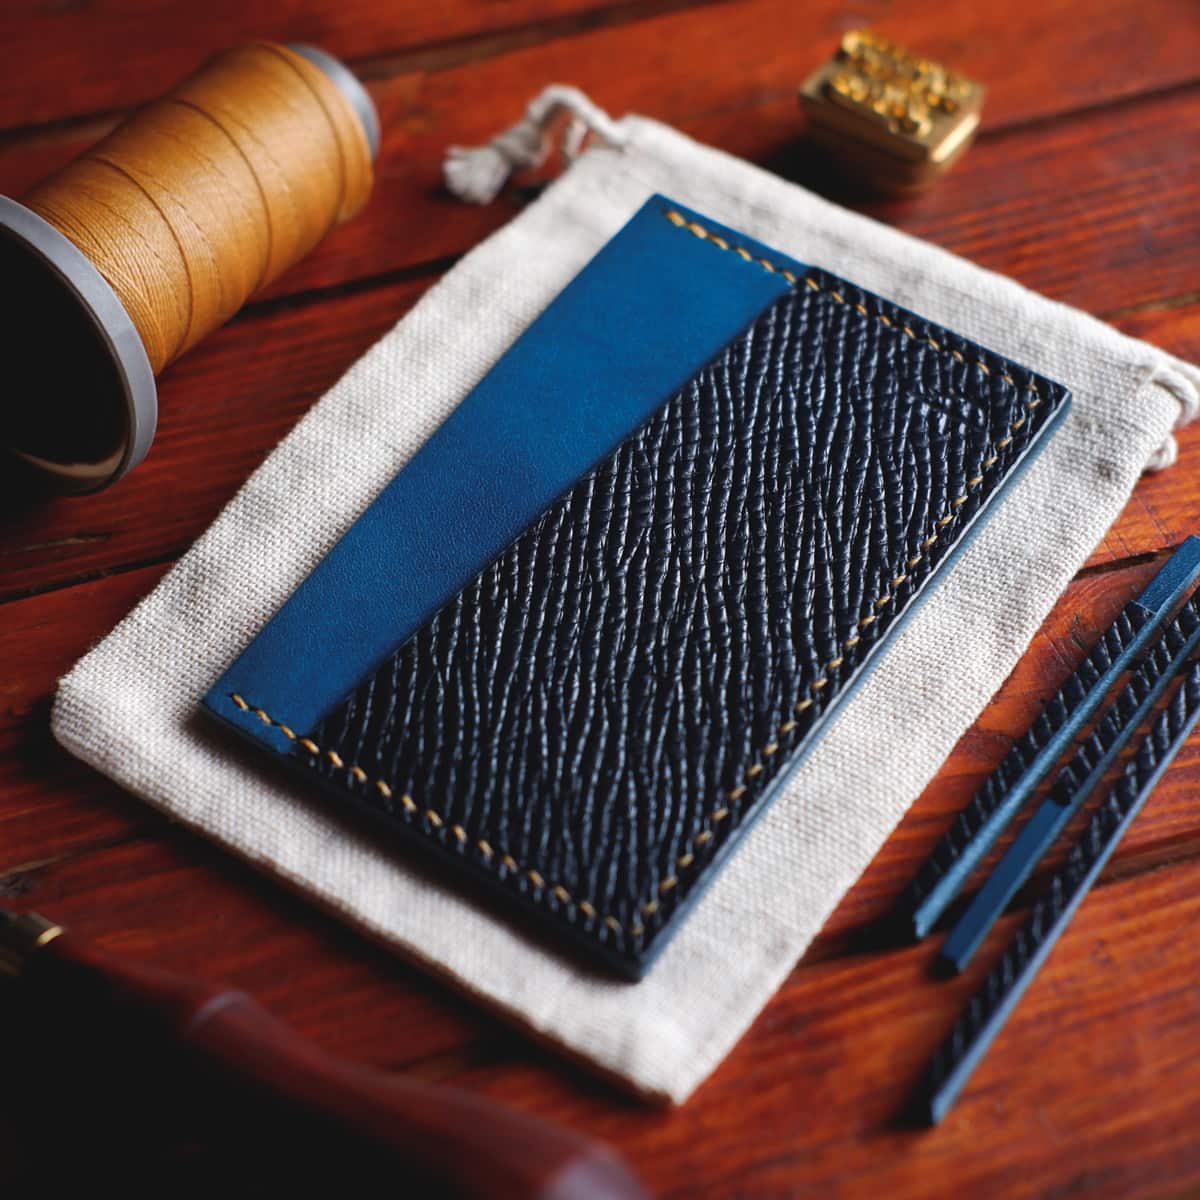 Tabletop view of The Scots Card Holder in Blue Buttero Hatch and Italico Tirreno vegetable tanned leathers